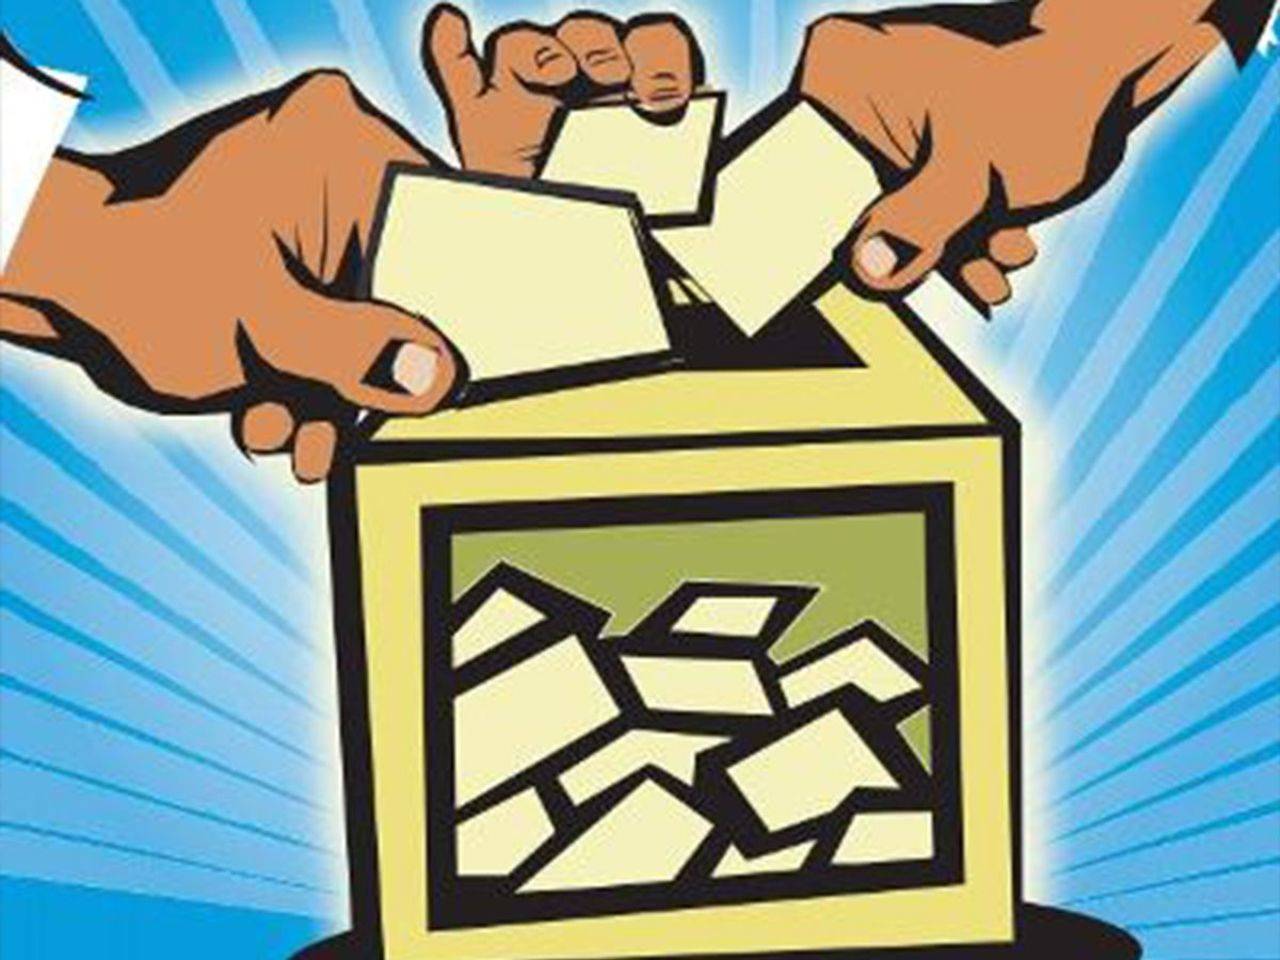 Telangana assembly elections 2018: Not voting? Joke's on you, says Hyderabad  comics | Hyderabad News - Times of India